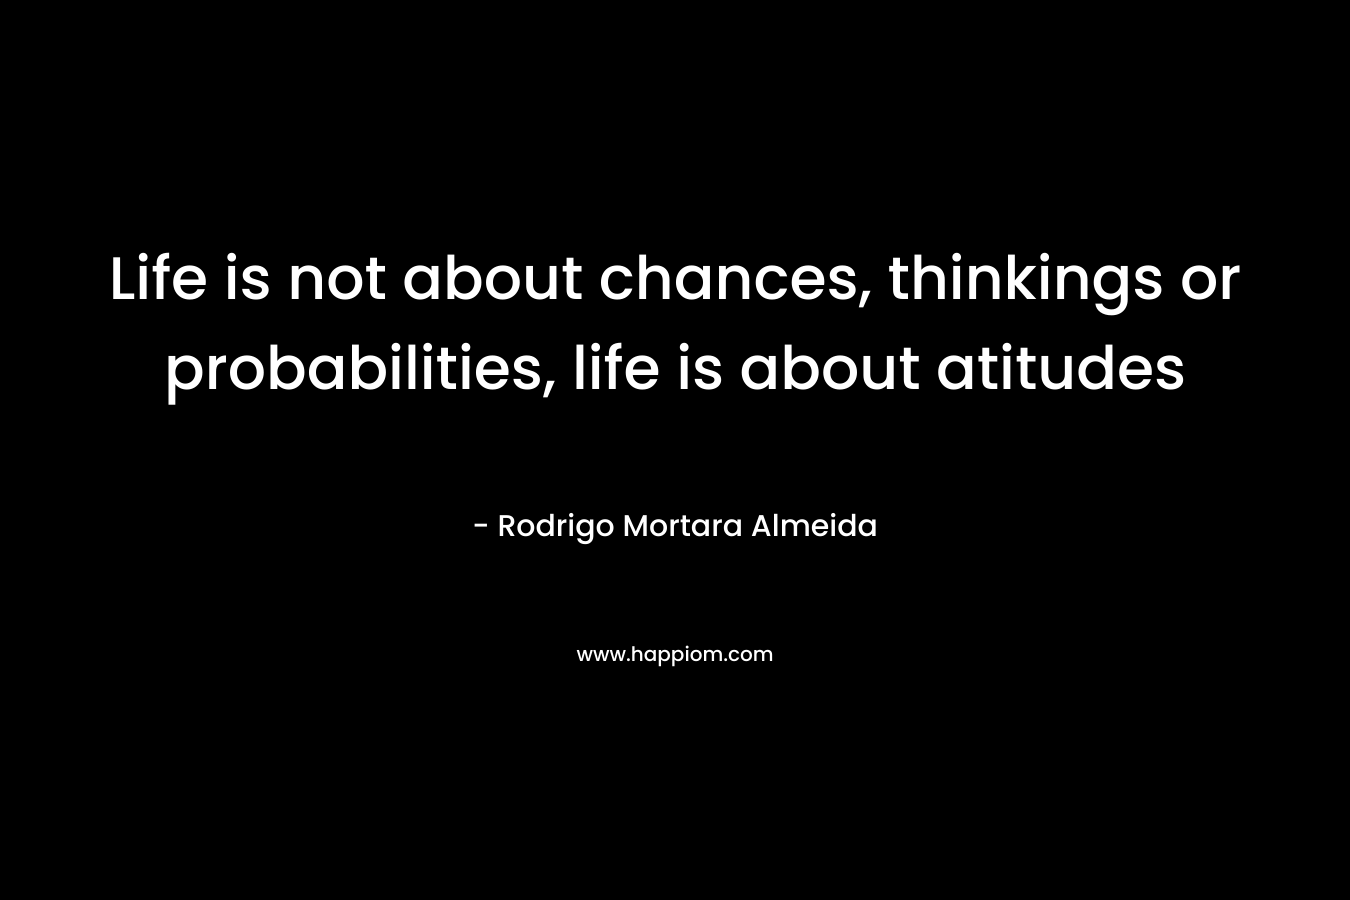 Life is not about chances, thinkings or probabilities, life is about atitudes